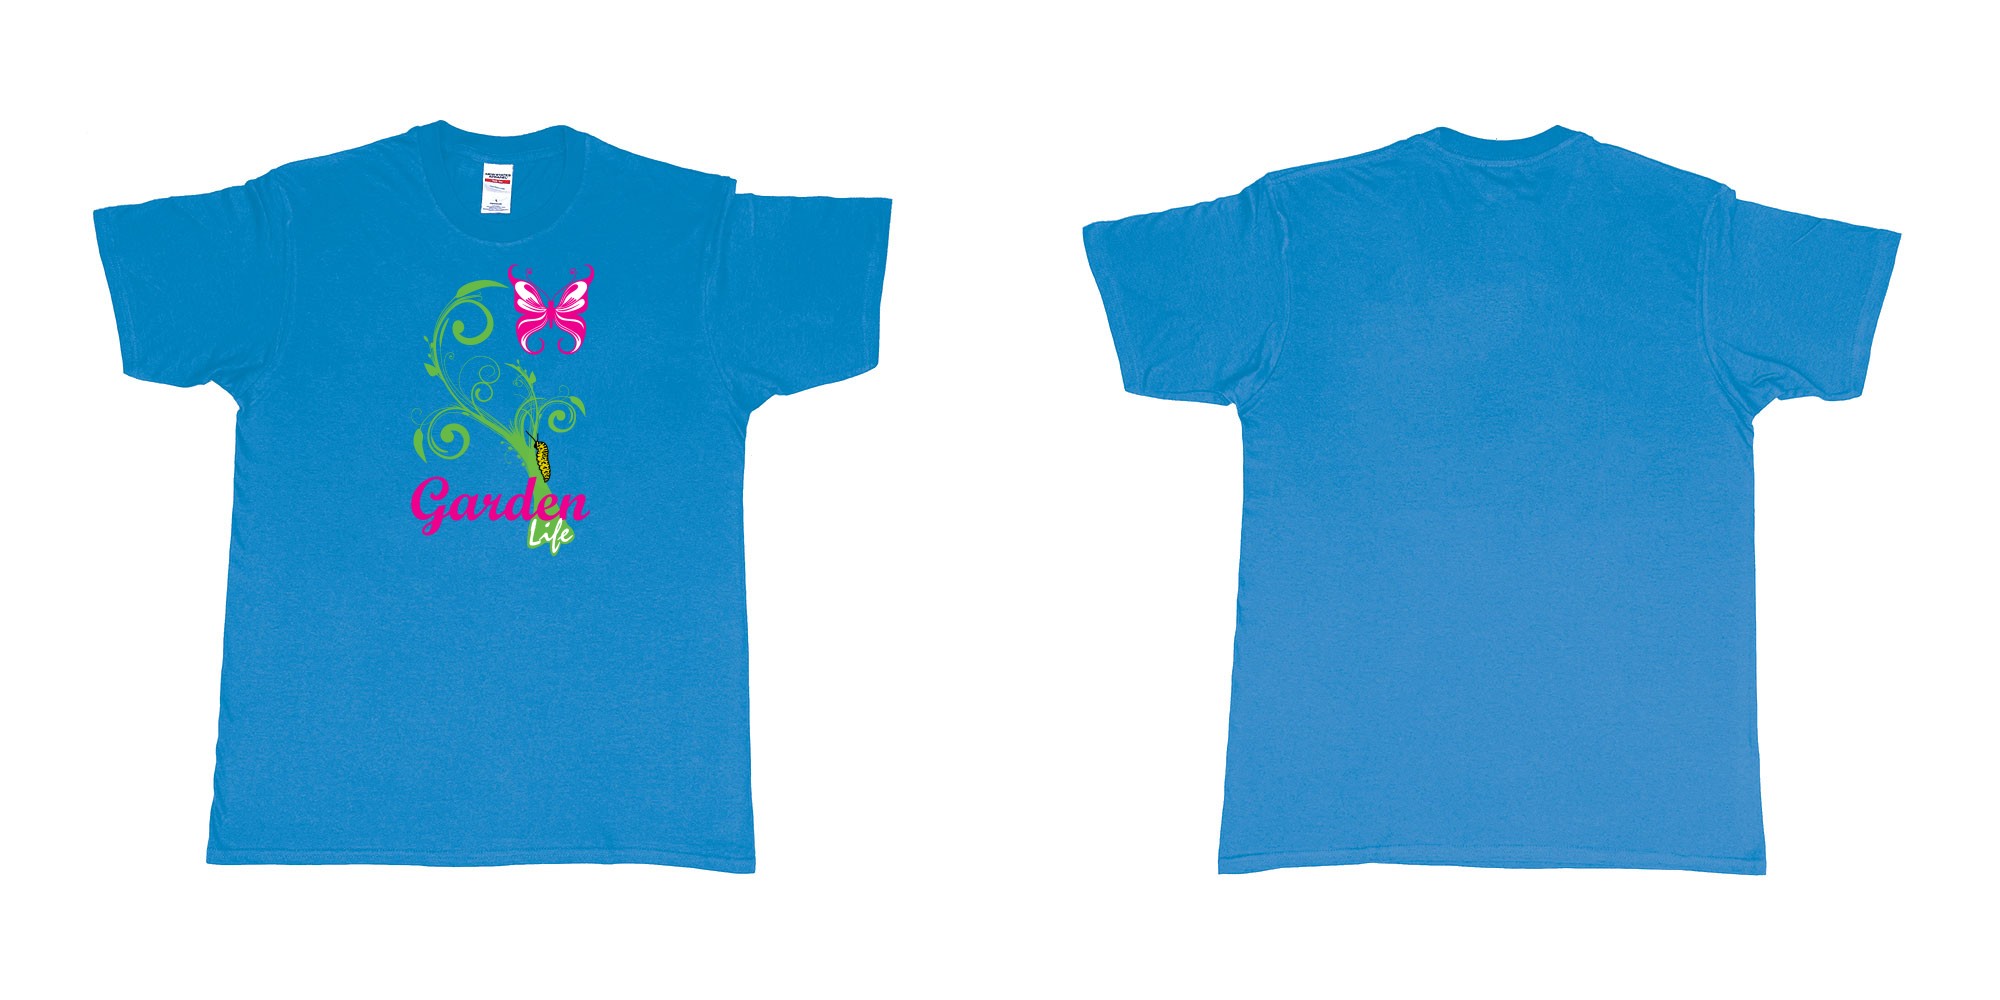 Custom tshirt design garden life transformation from a caterpillar and a butterfly in fabric color sapphire choice your own text made in Bali by The Pirate Way